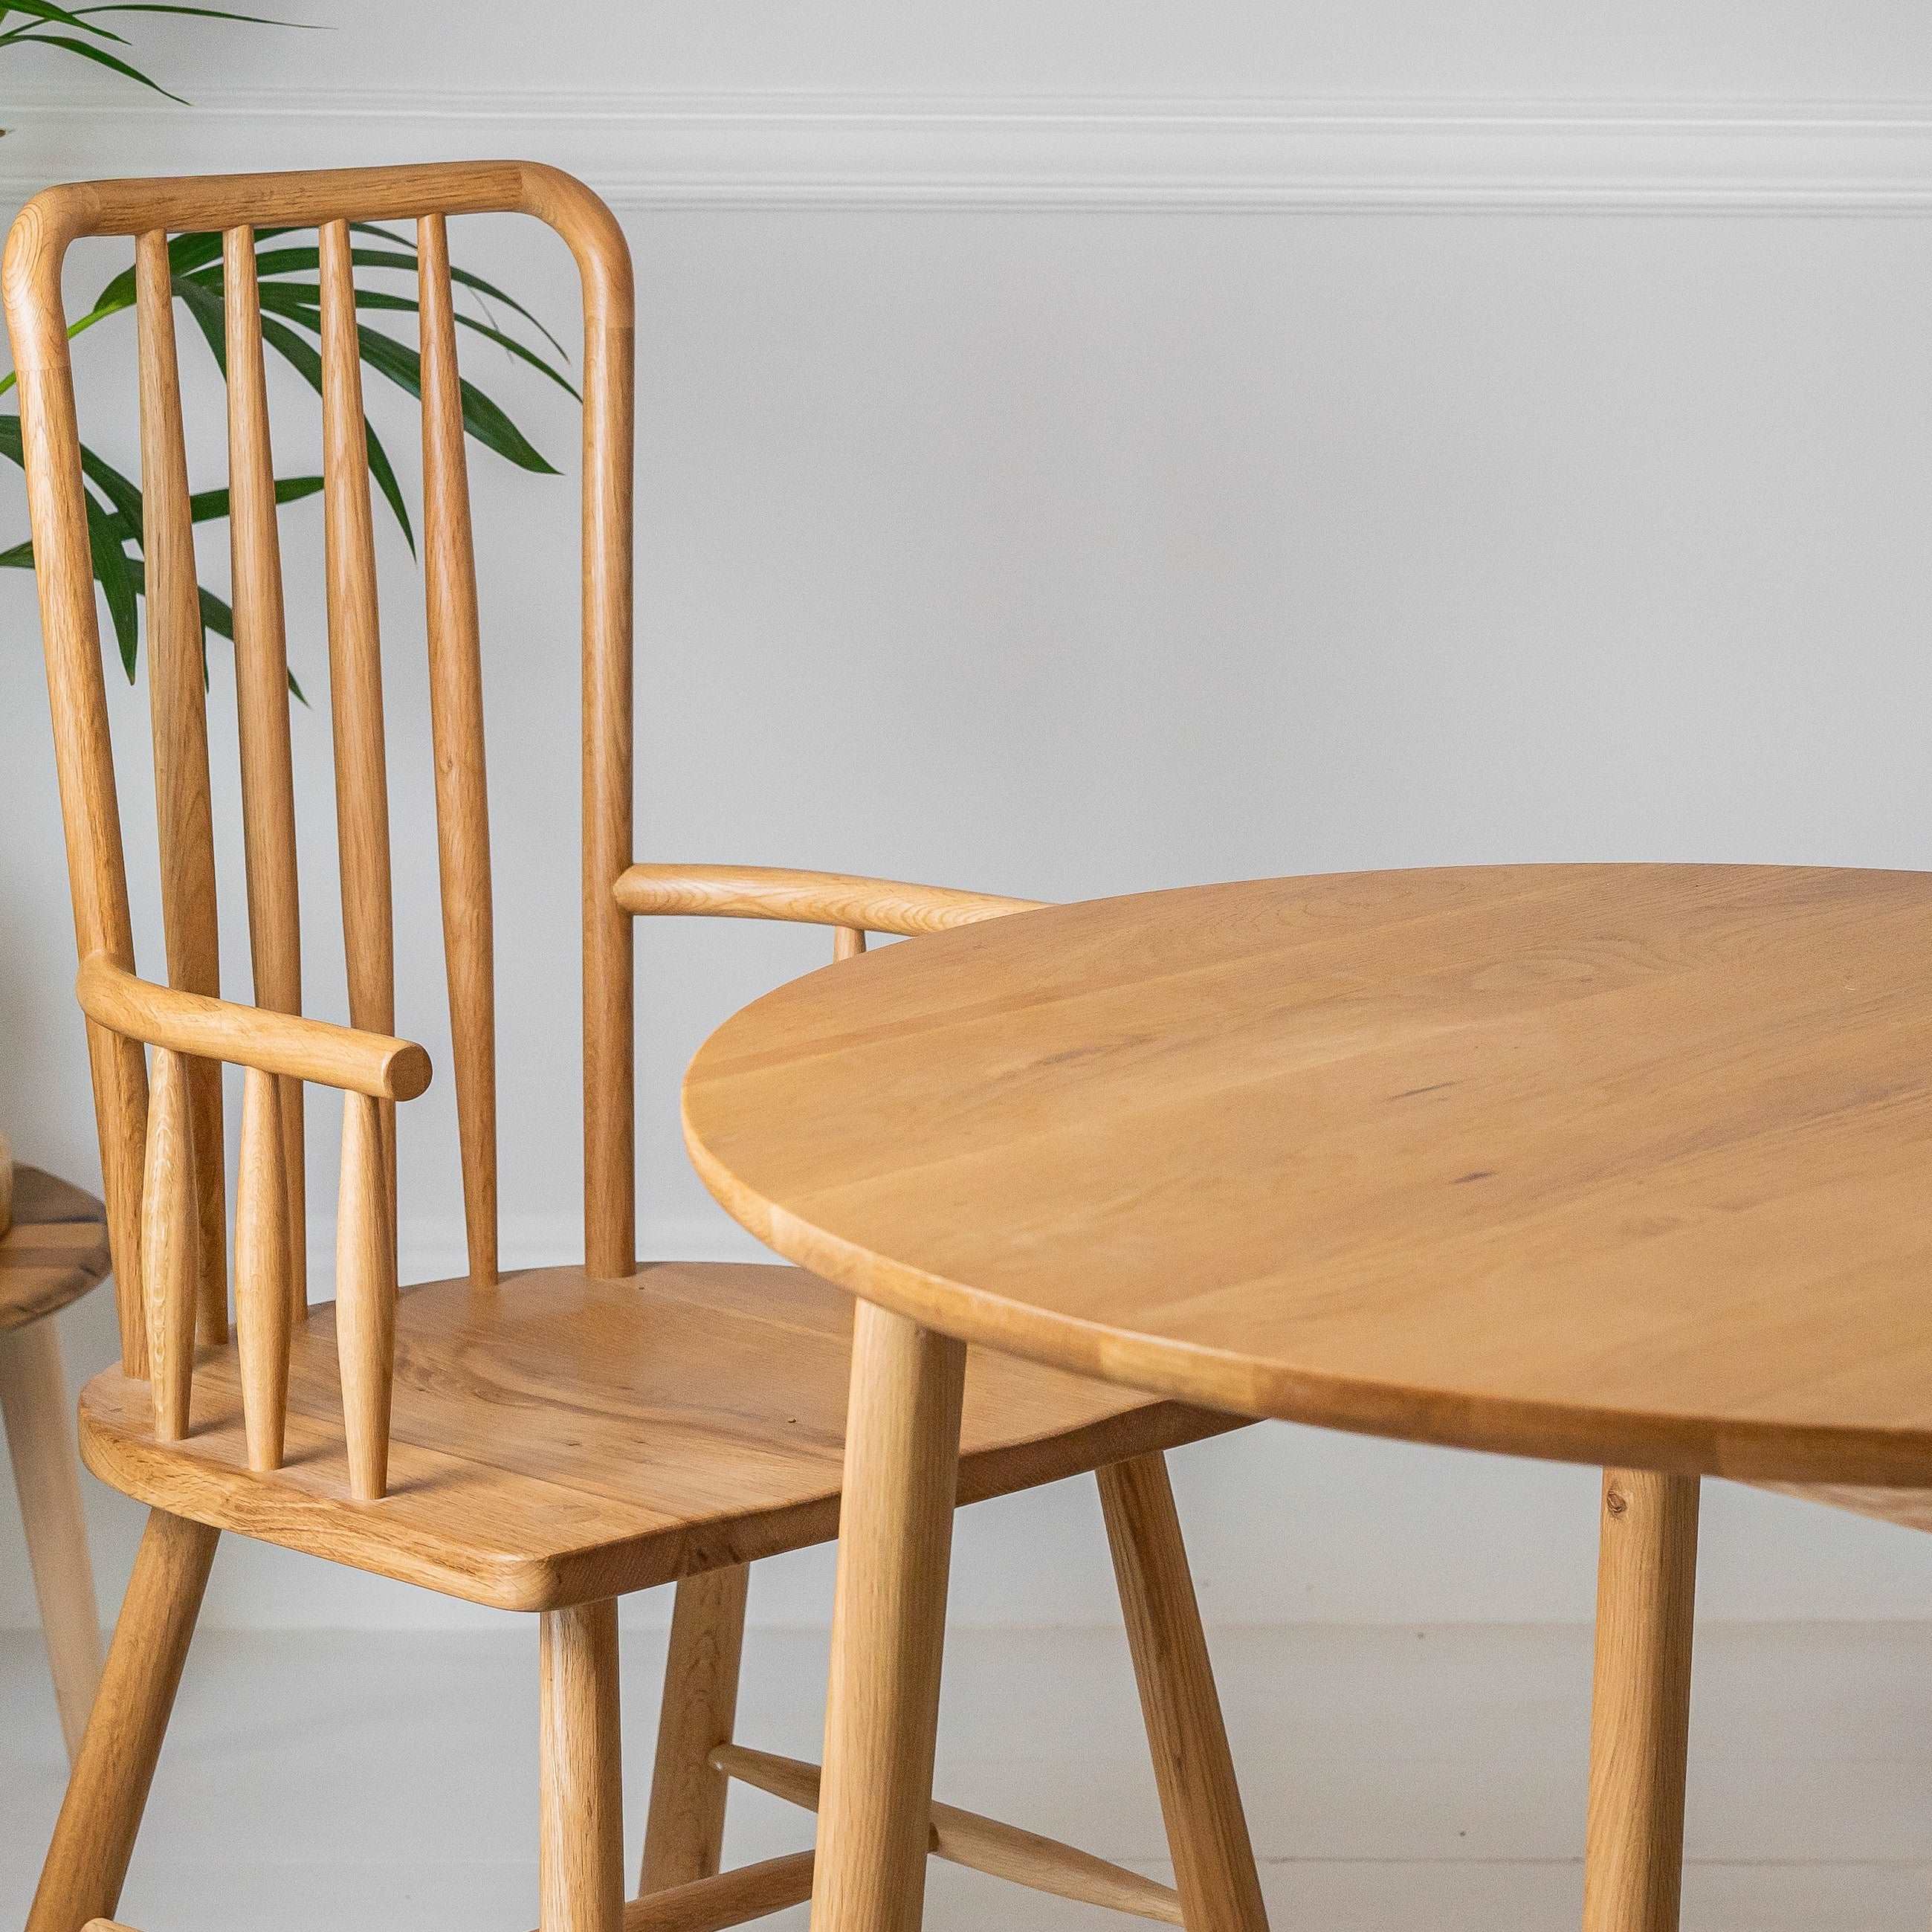 Sandywater Small Round Oak Dining Table